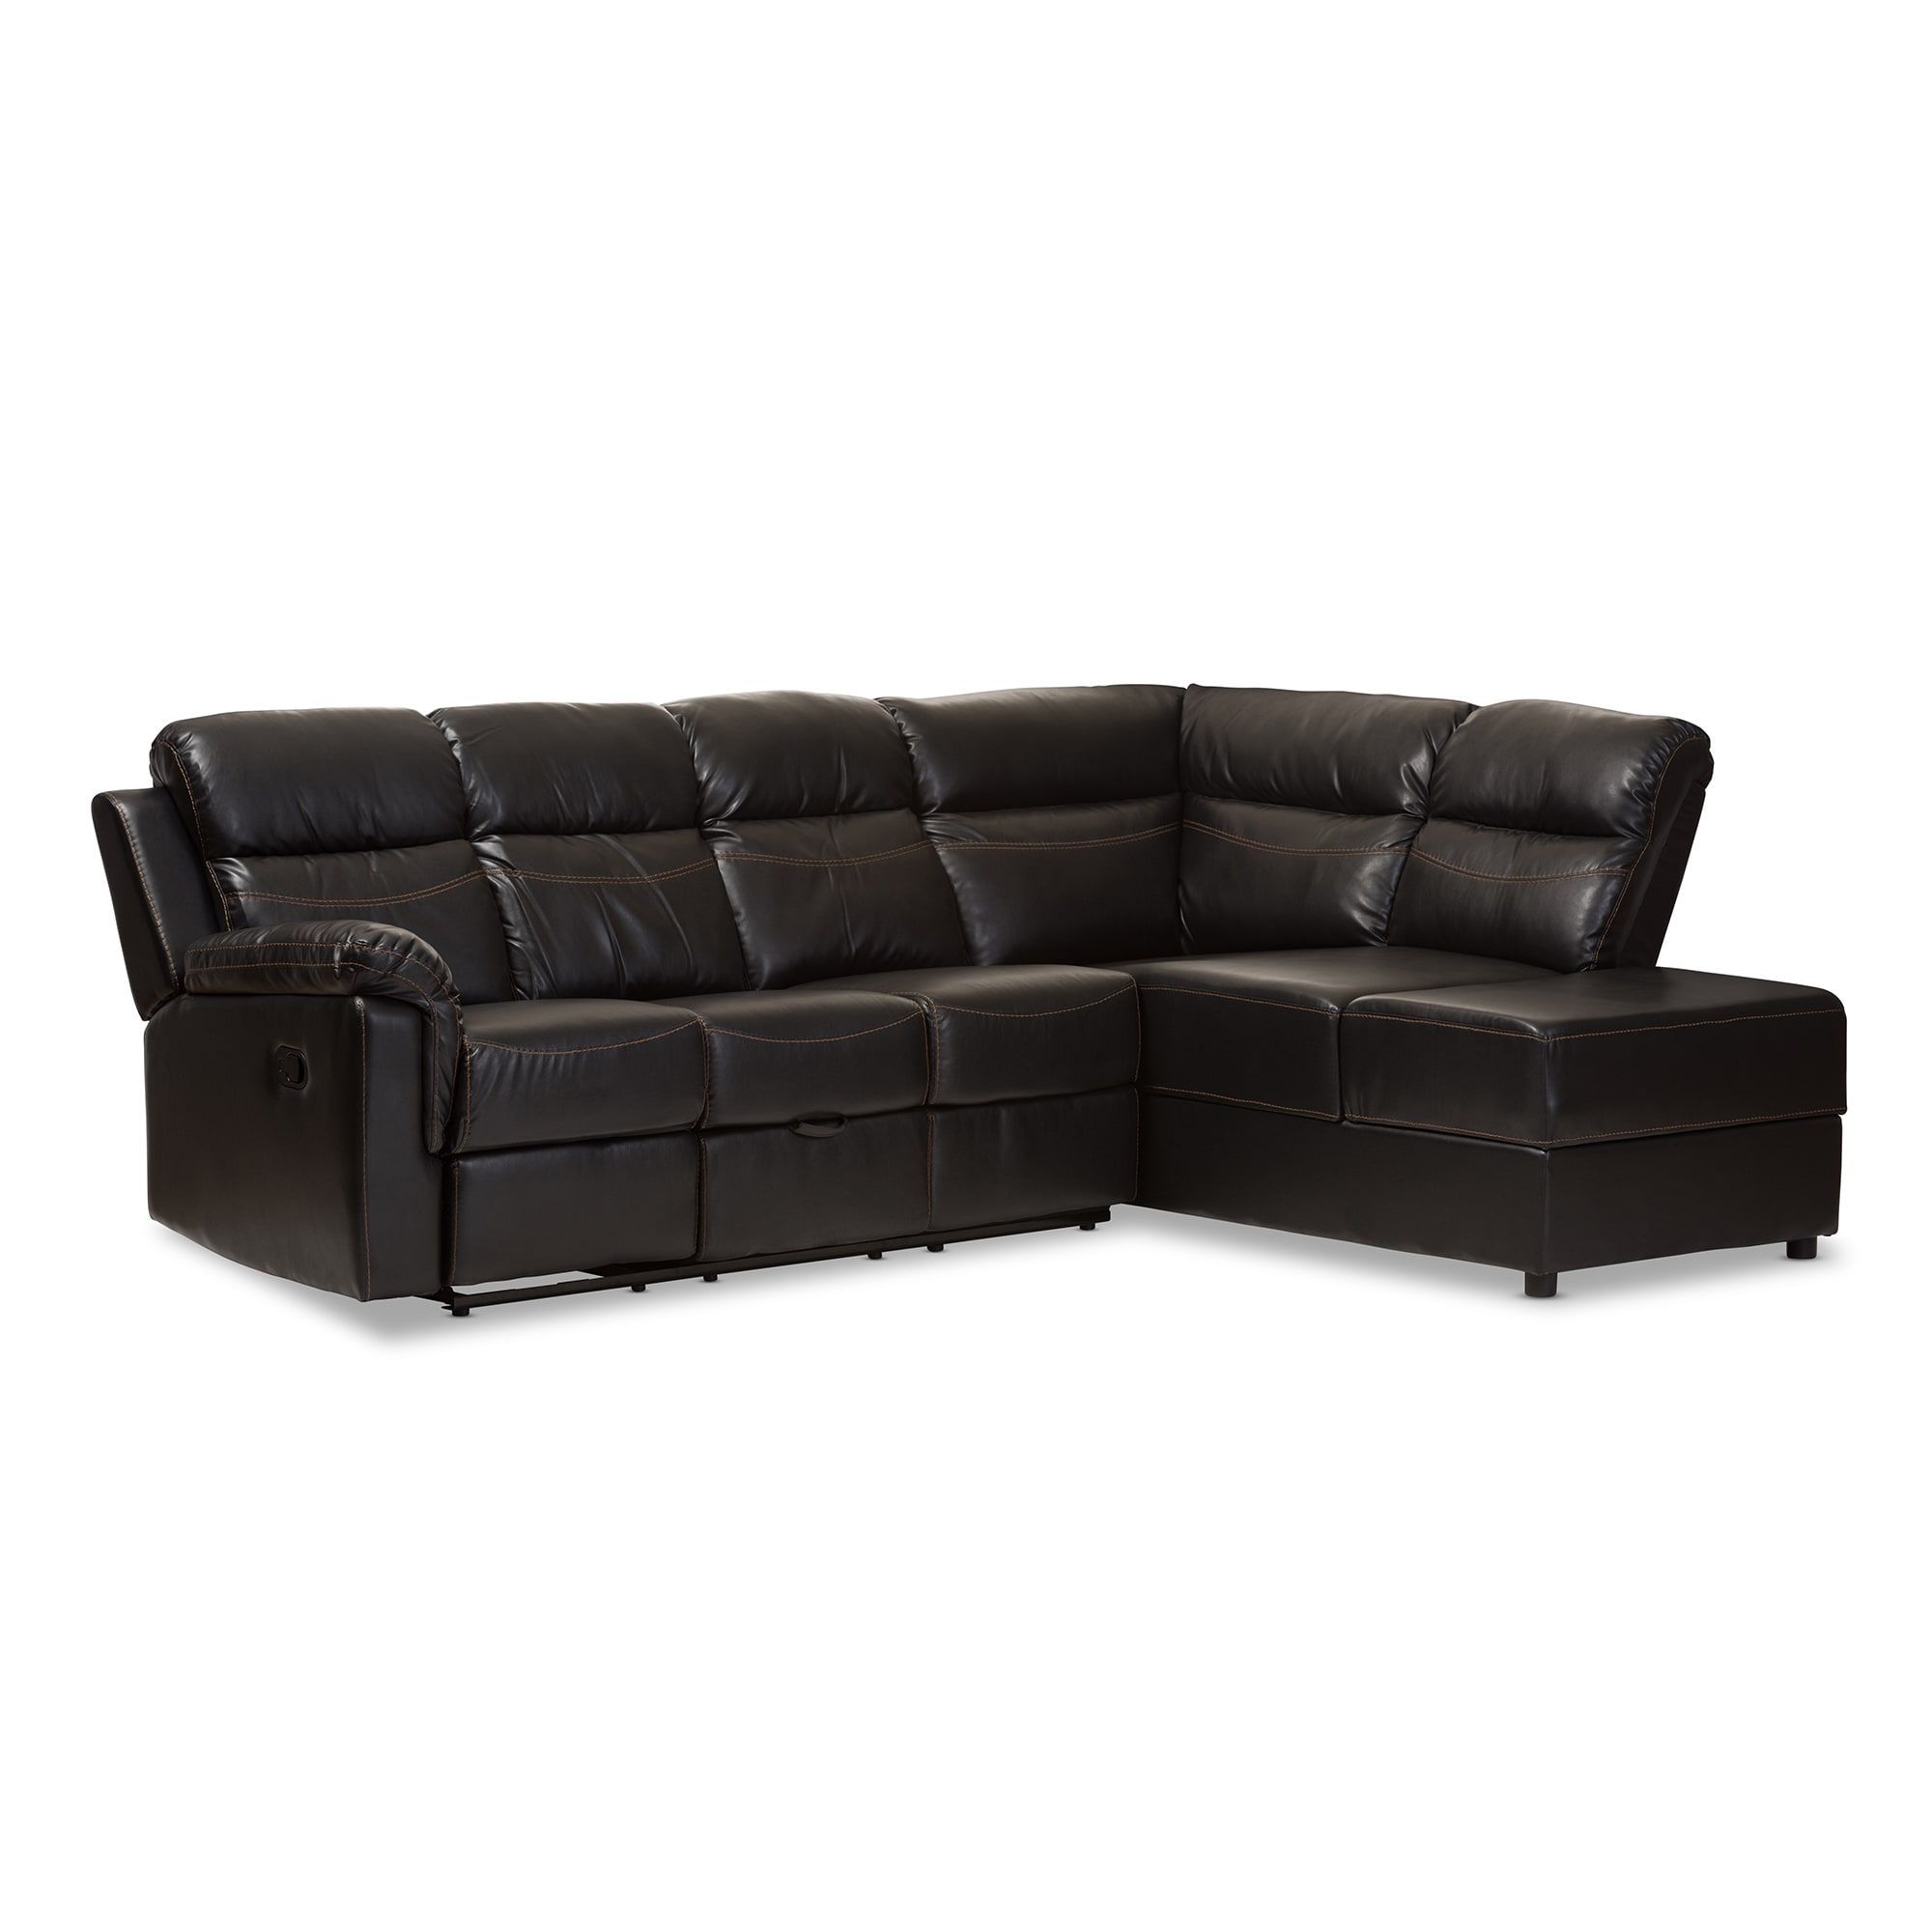 Our Best Living Room Furniture Deals | Storage Chaise Pertaining To 2pc Burland Contemporary Sectional Sofas Charcoal (View 7 of 15)